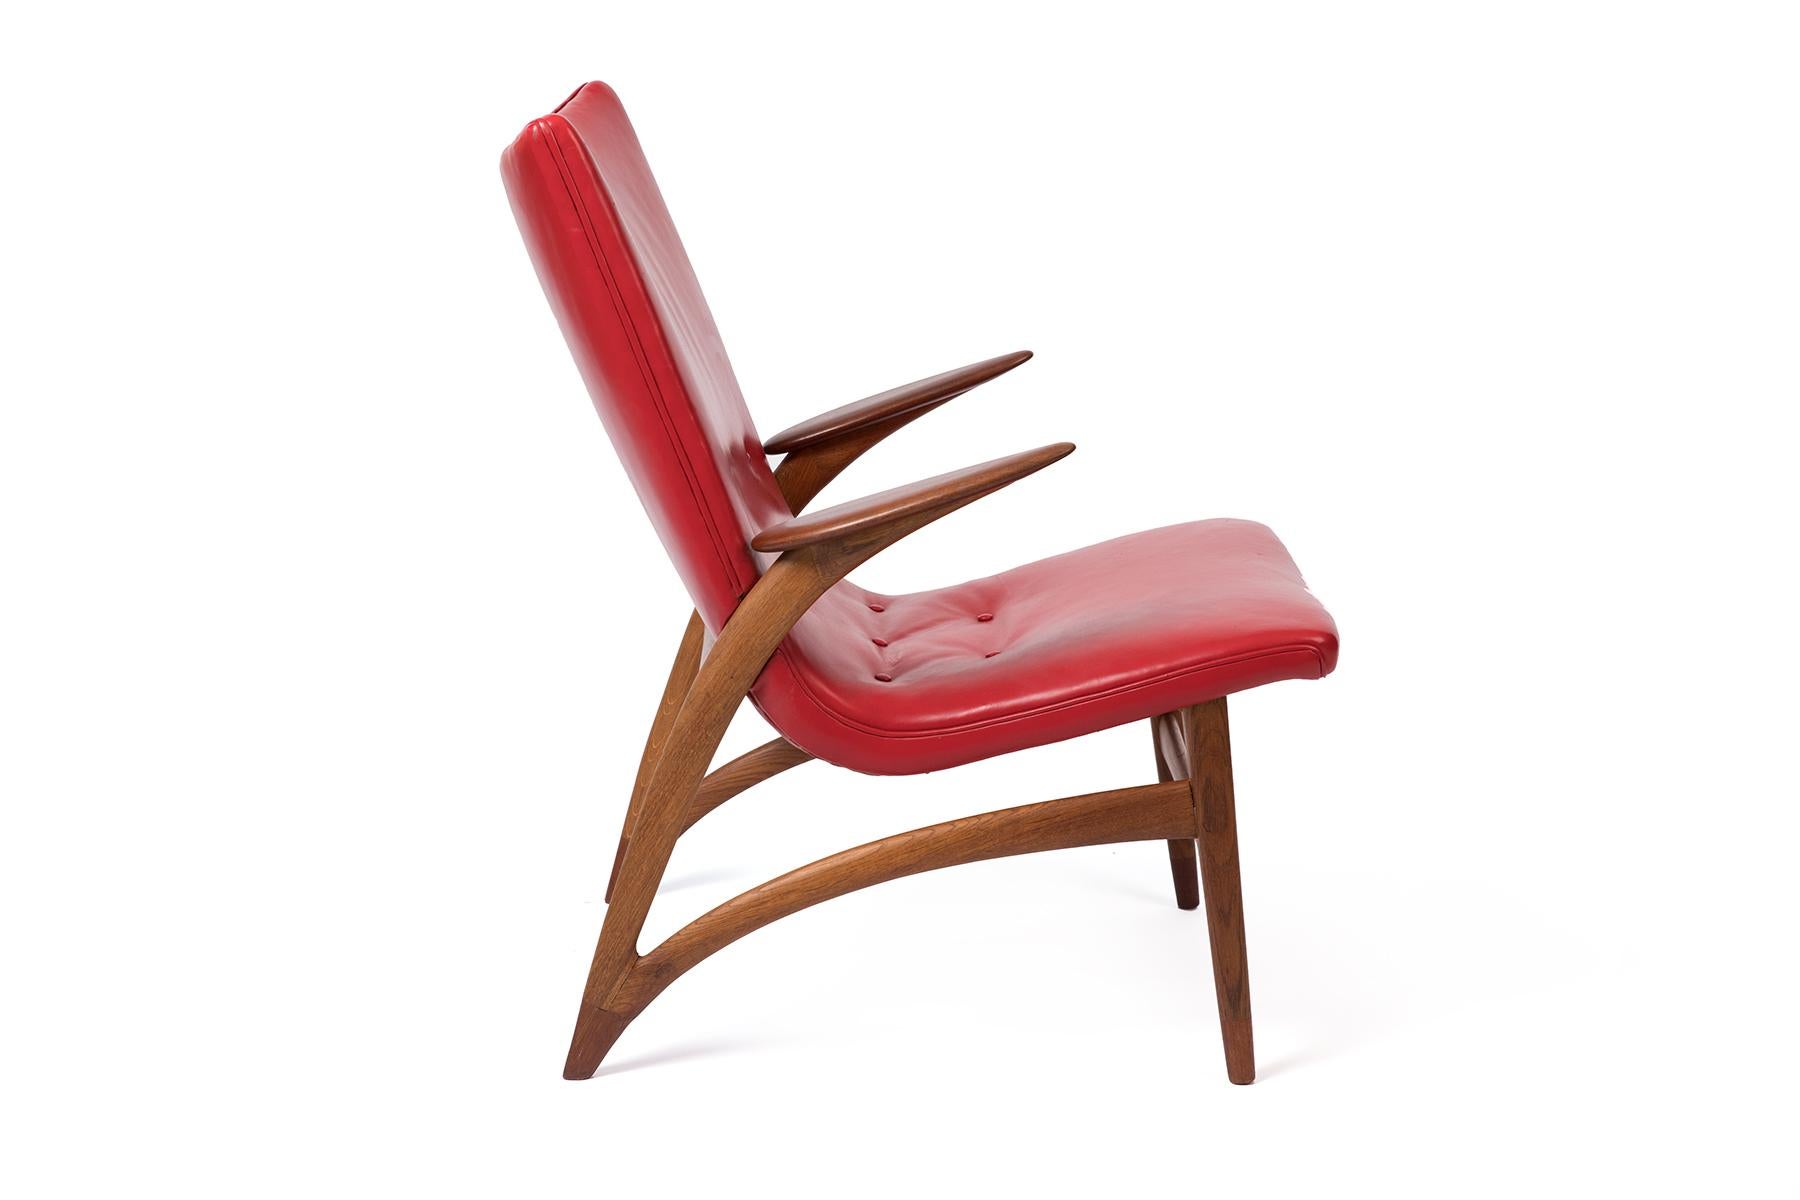 Sculpted teak and leather lounge chair by J L Möller circa late 1950s. This stunning and rare example is all original and seldom seen.